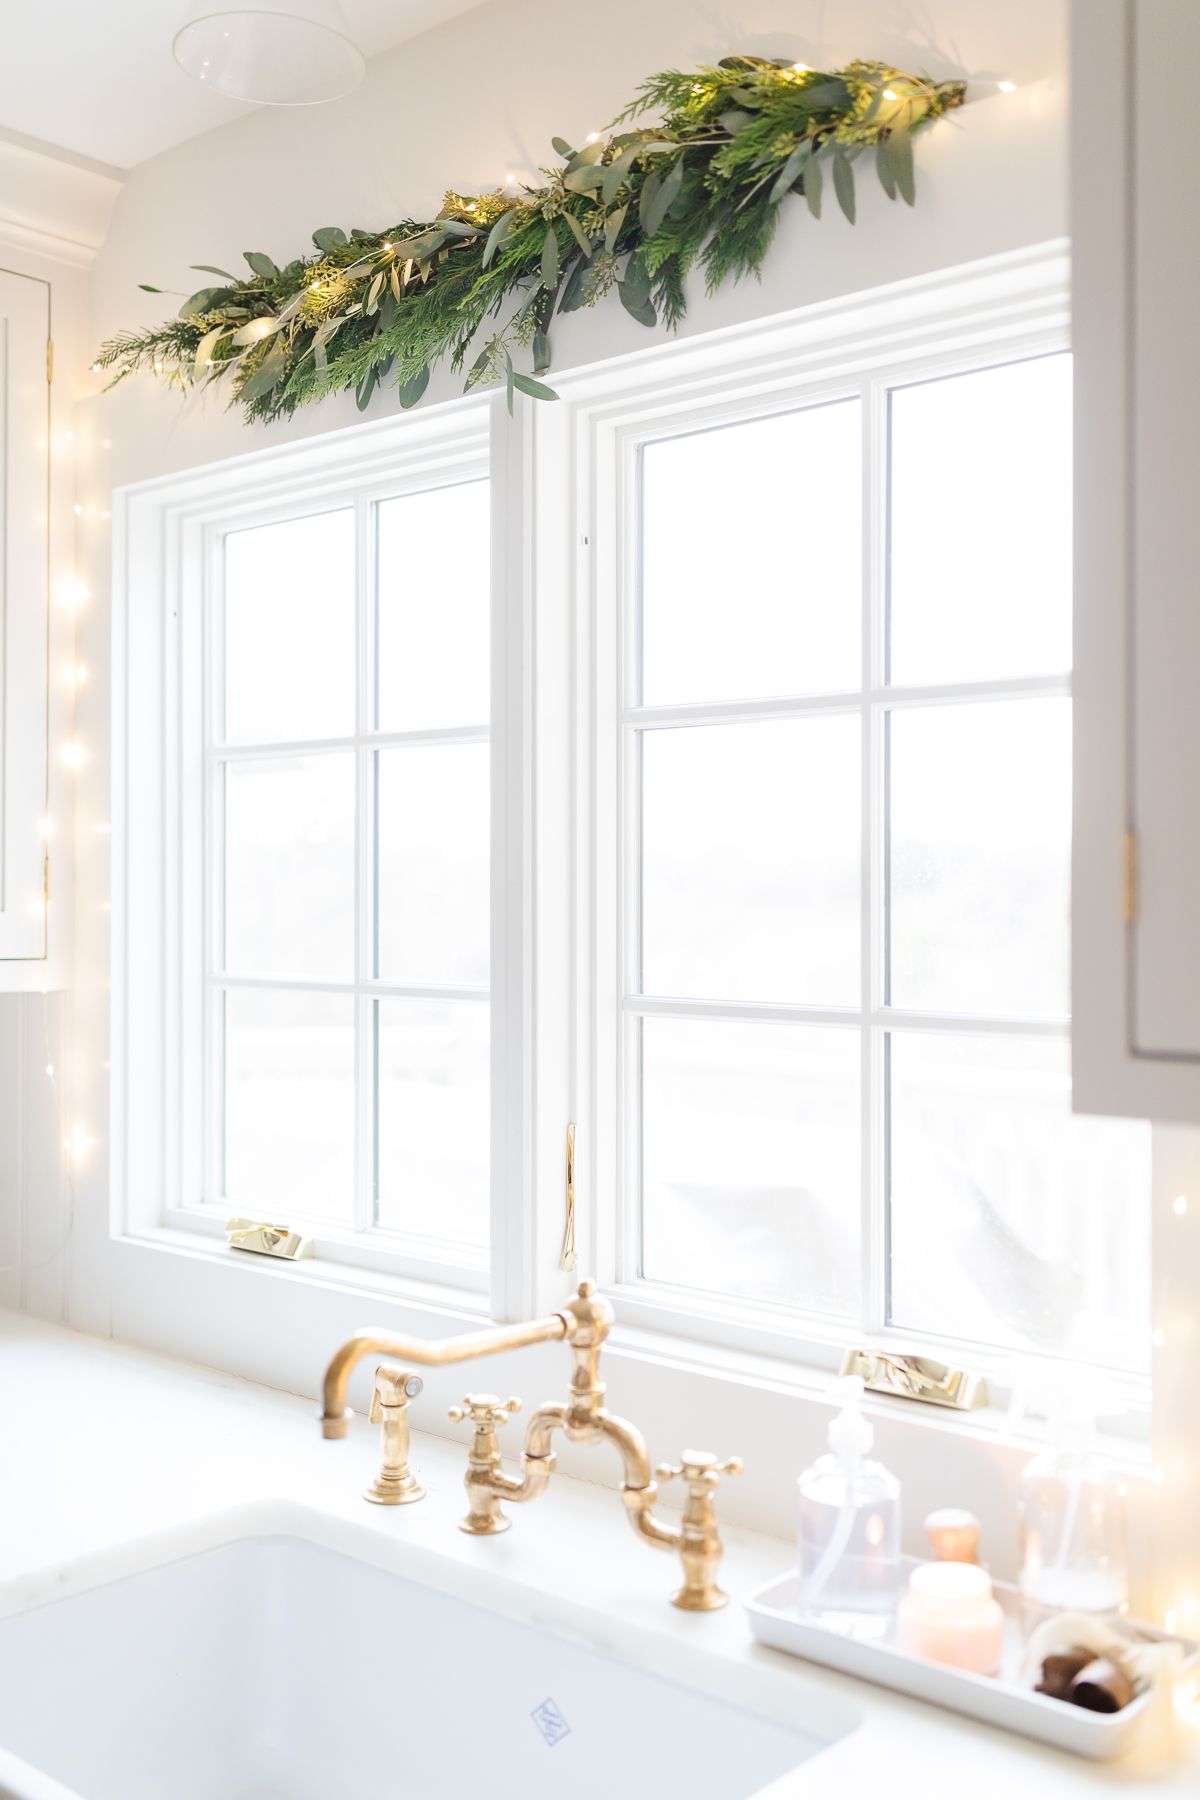 Fresh Christmas greenery and light above a kitchen window